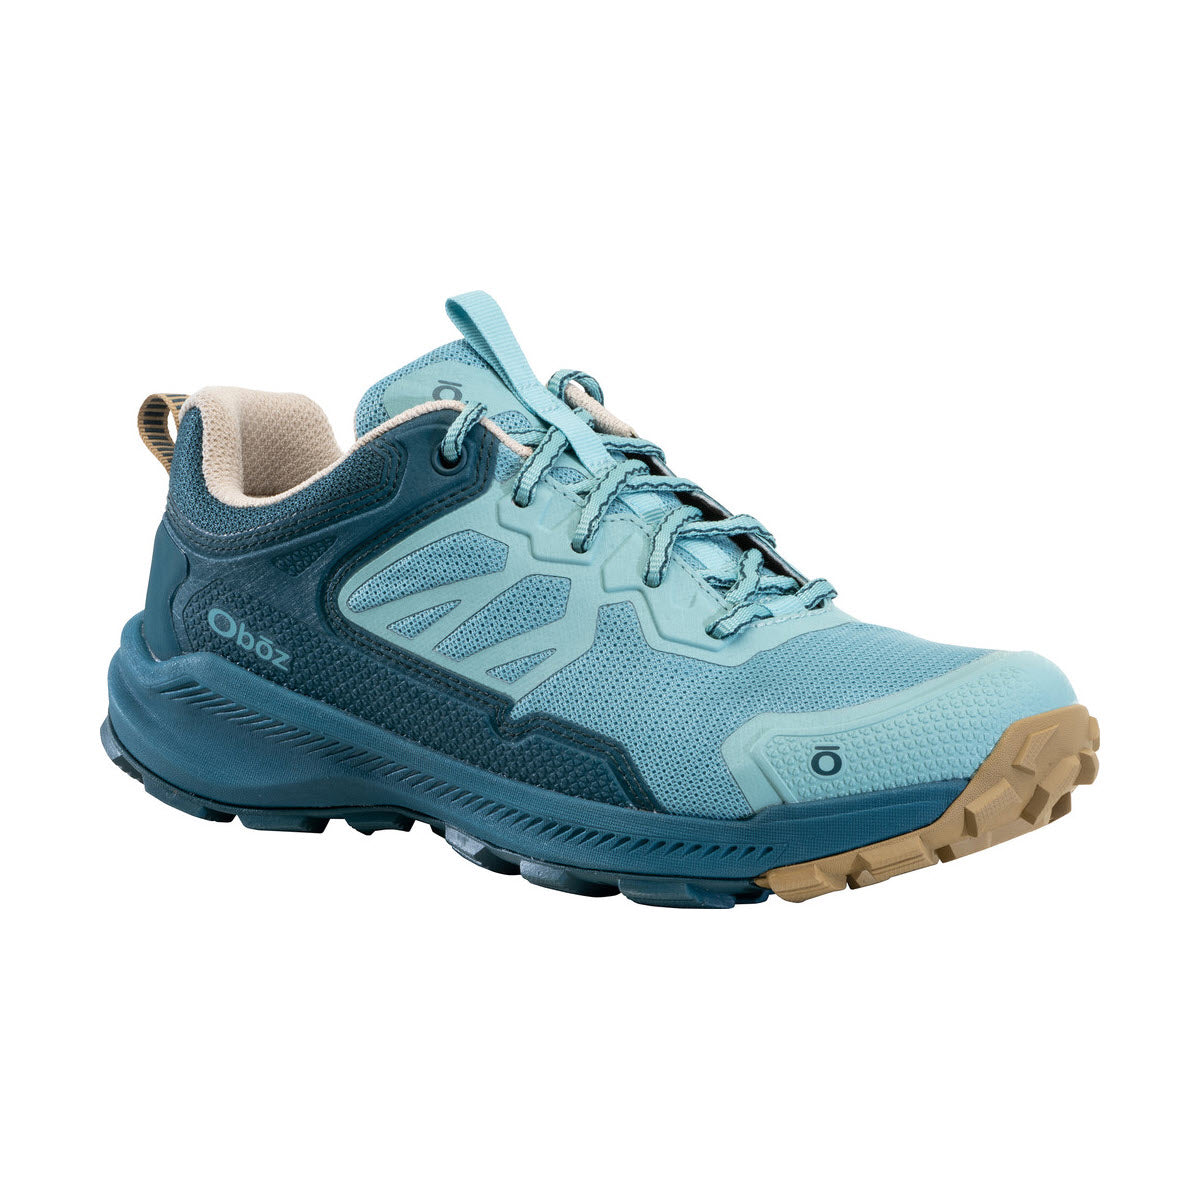 A light blue OBOZ KATABATIC LOW DARK ISLAND hiking shoe with tan sole, featuring a lace-up closure and the brand logo on the side.